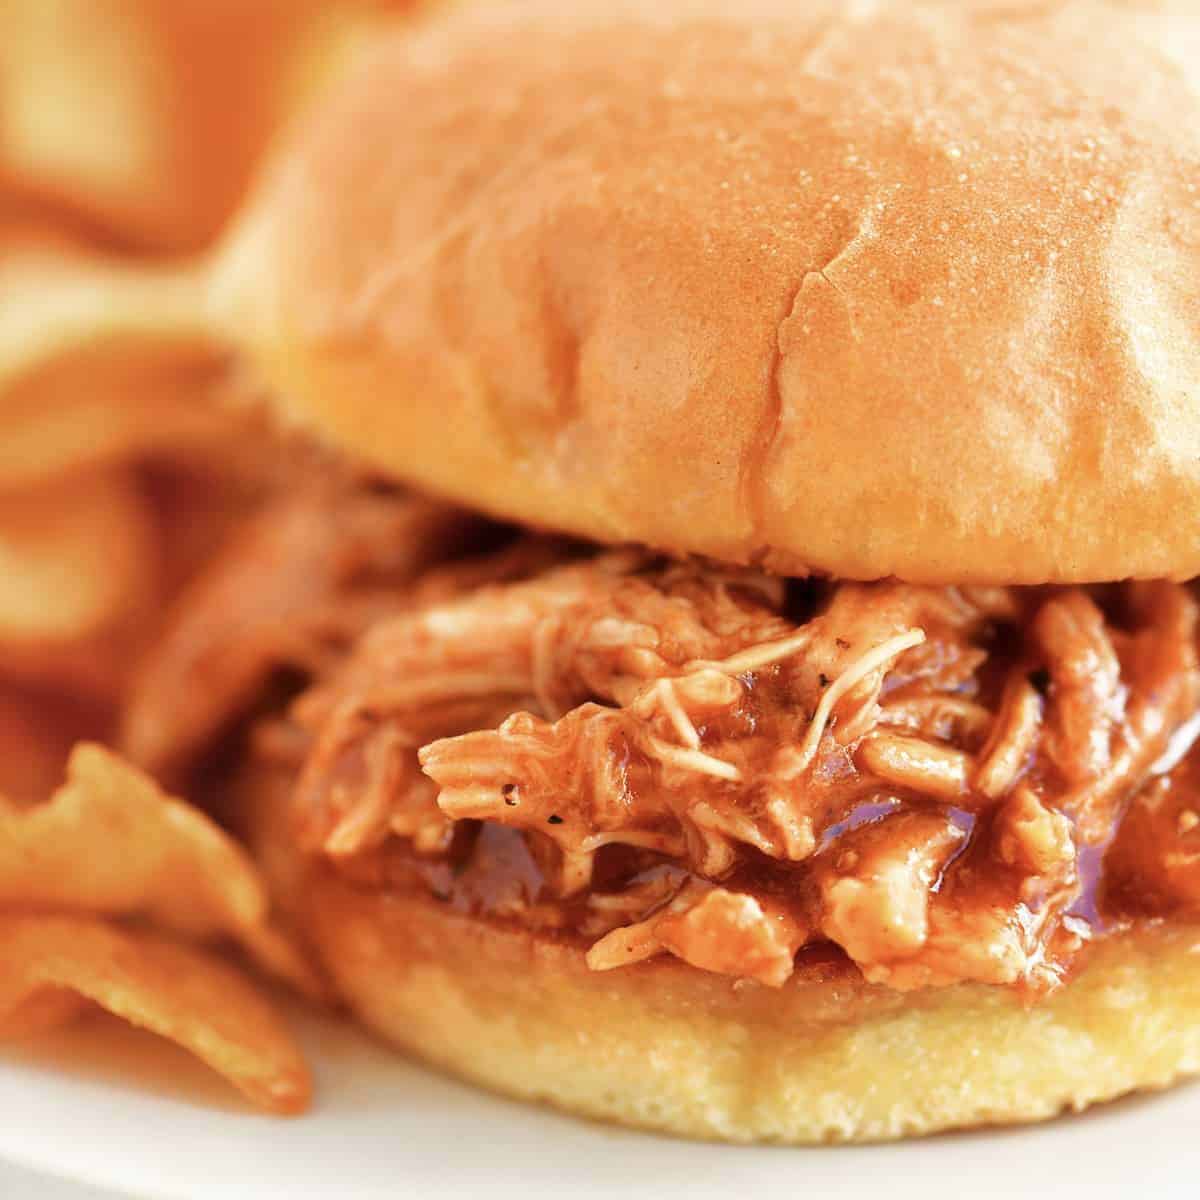 Barbecue chicken sandwich on a plate with chips.